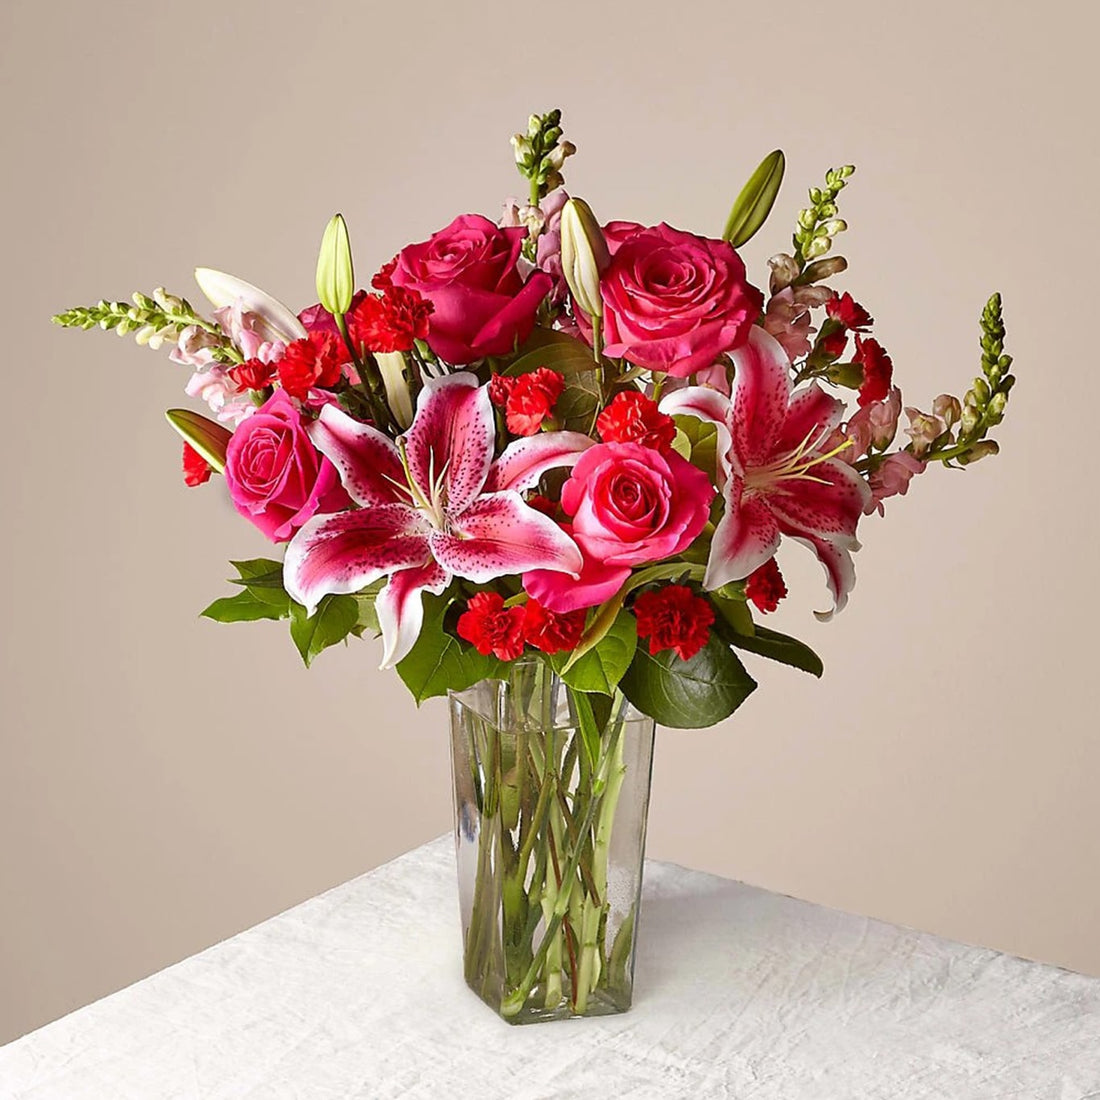 Roses Special Valentine, It is a beautiful anniversary gift, birthday flower gift, all occasion flower, and decoration, Fresh Flowers Orlando.